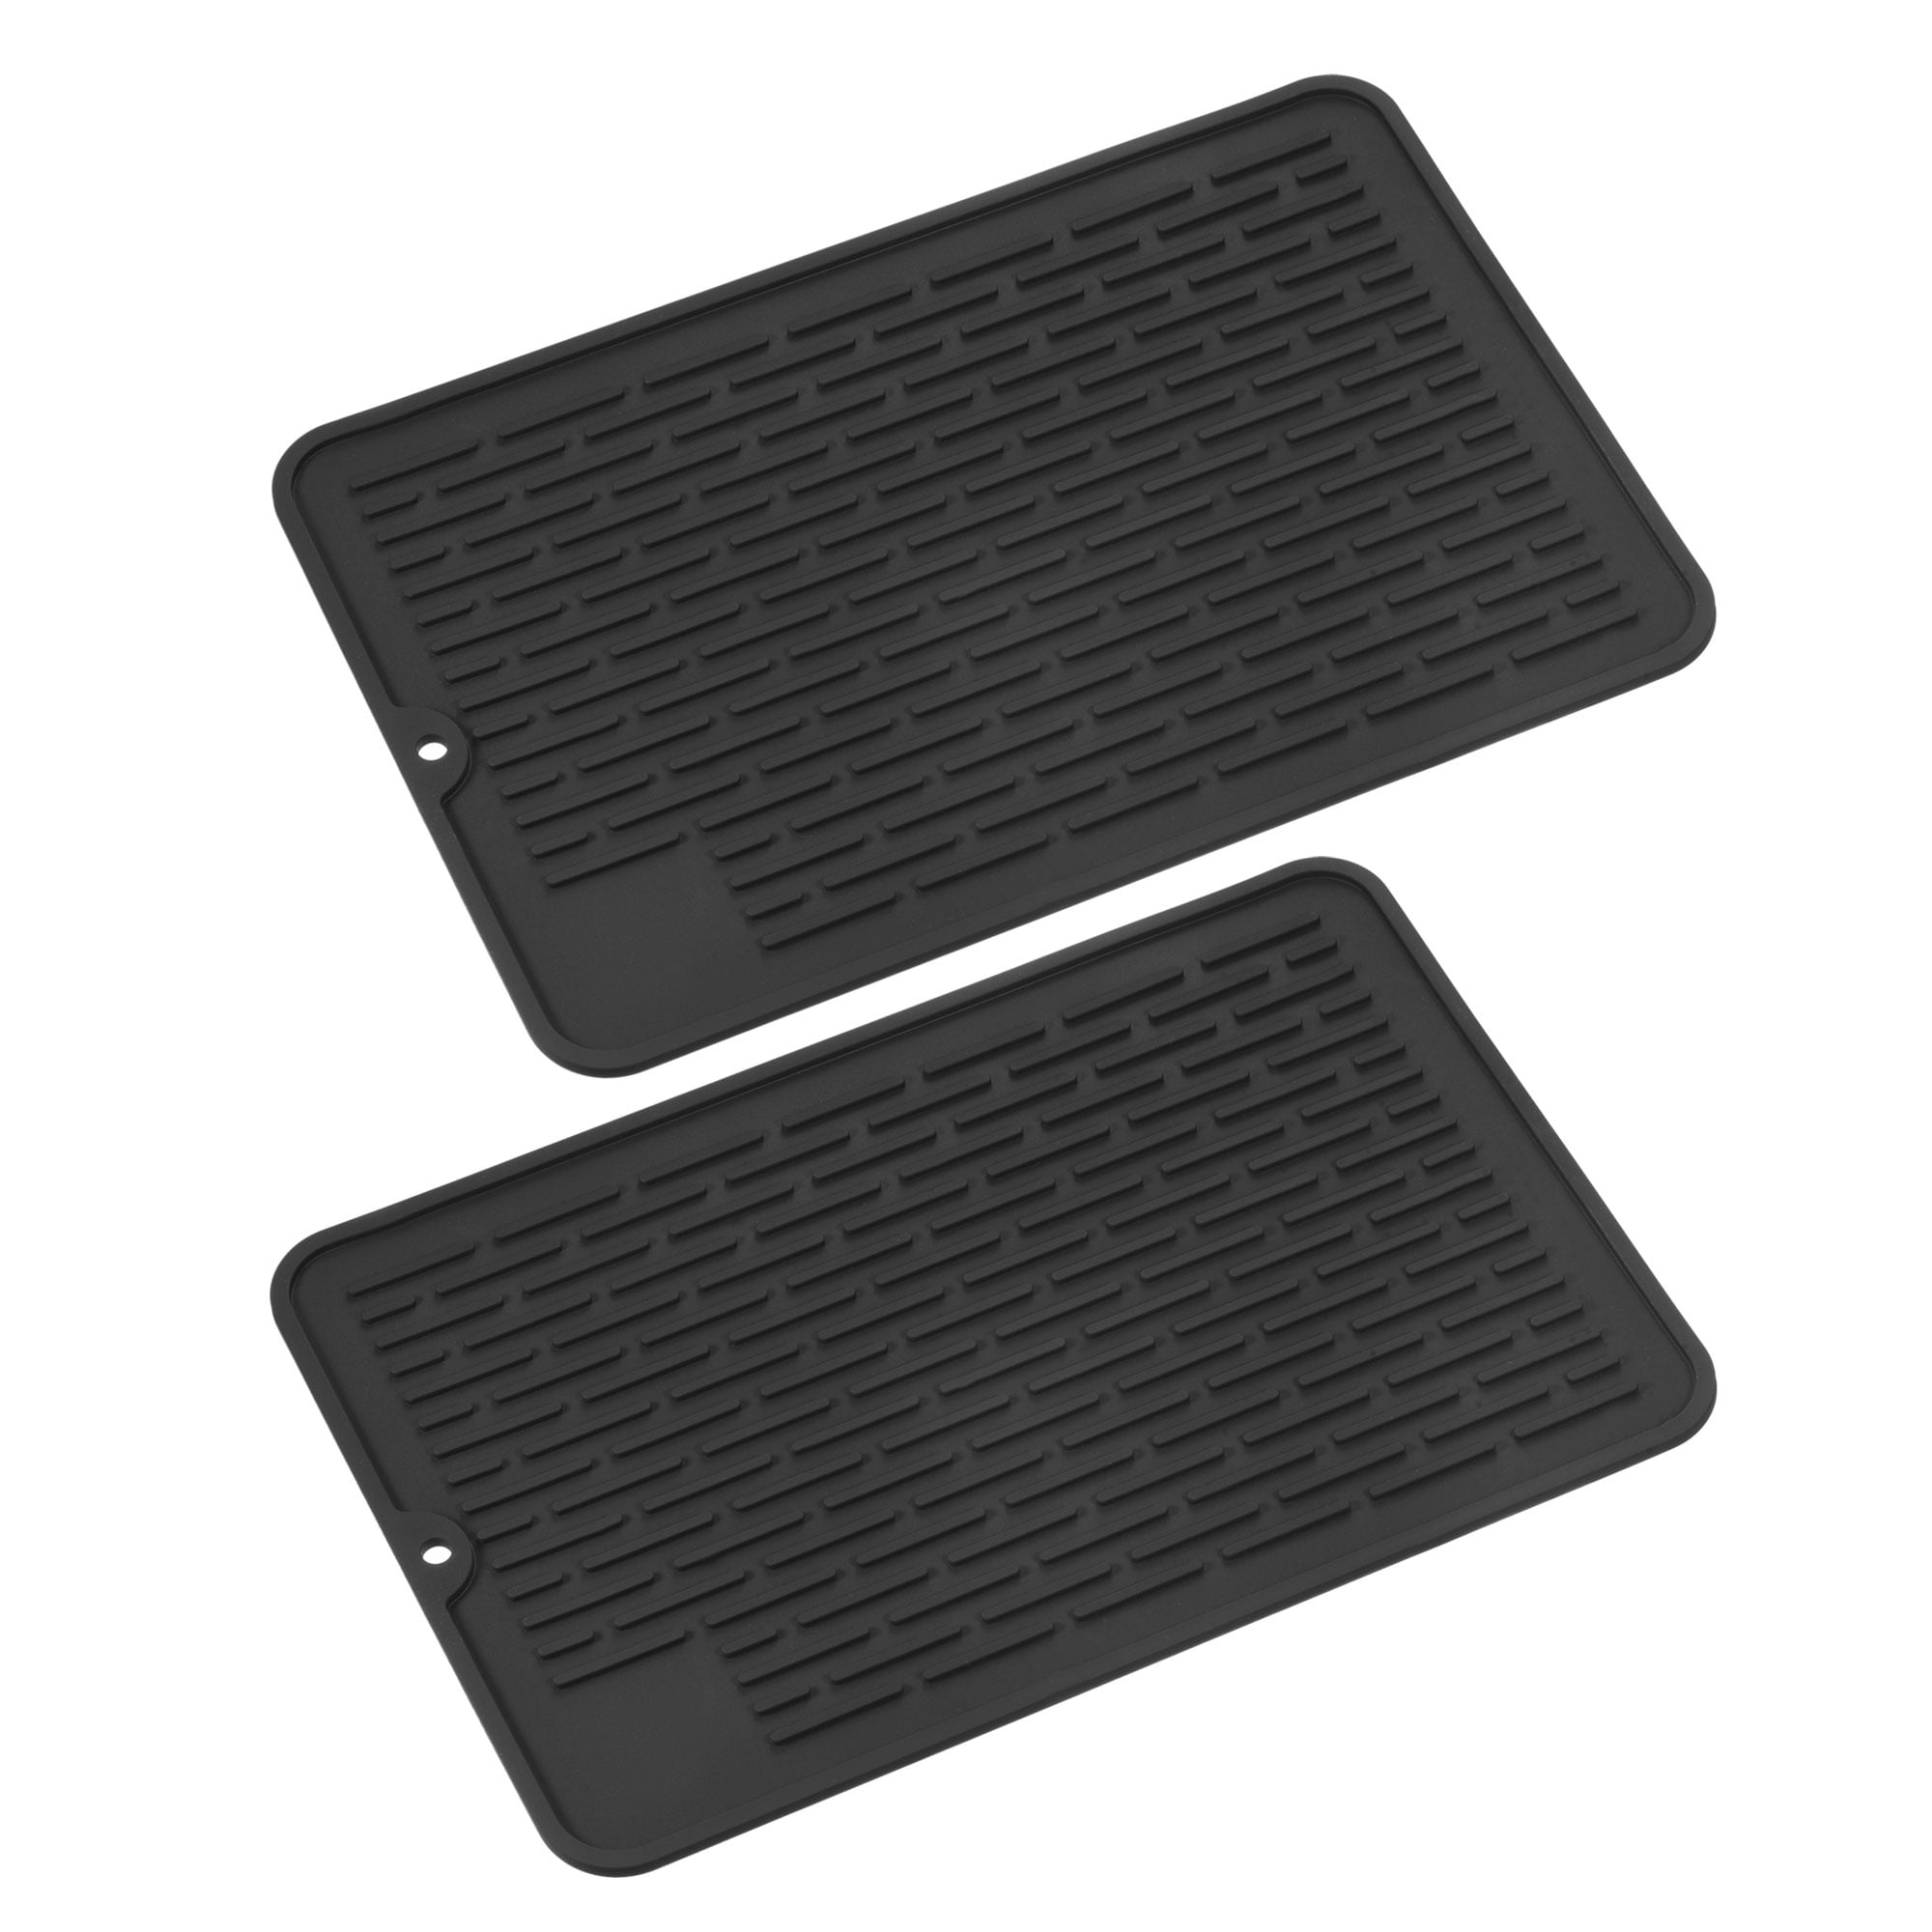 https://ak1.ostkcdn.com/images/products/is/images/direct/68b039459c7a10be3254a8c4d8dfb33a1463c12c/Silicone-Dish-Drying-Mat-2PCS%2C-Drying-Mat-for-Kitchen-Counter-2PCS.jpg